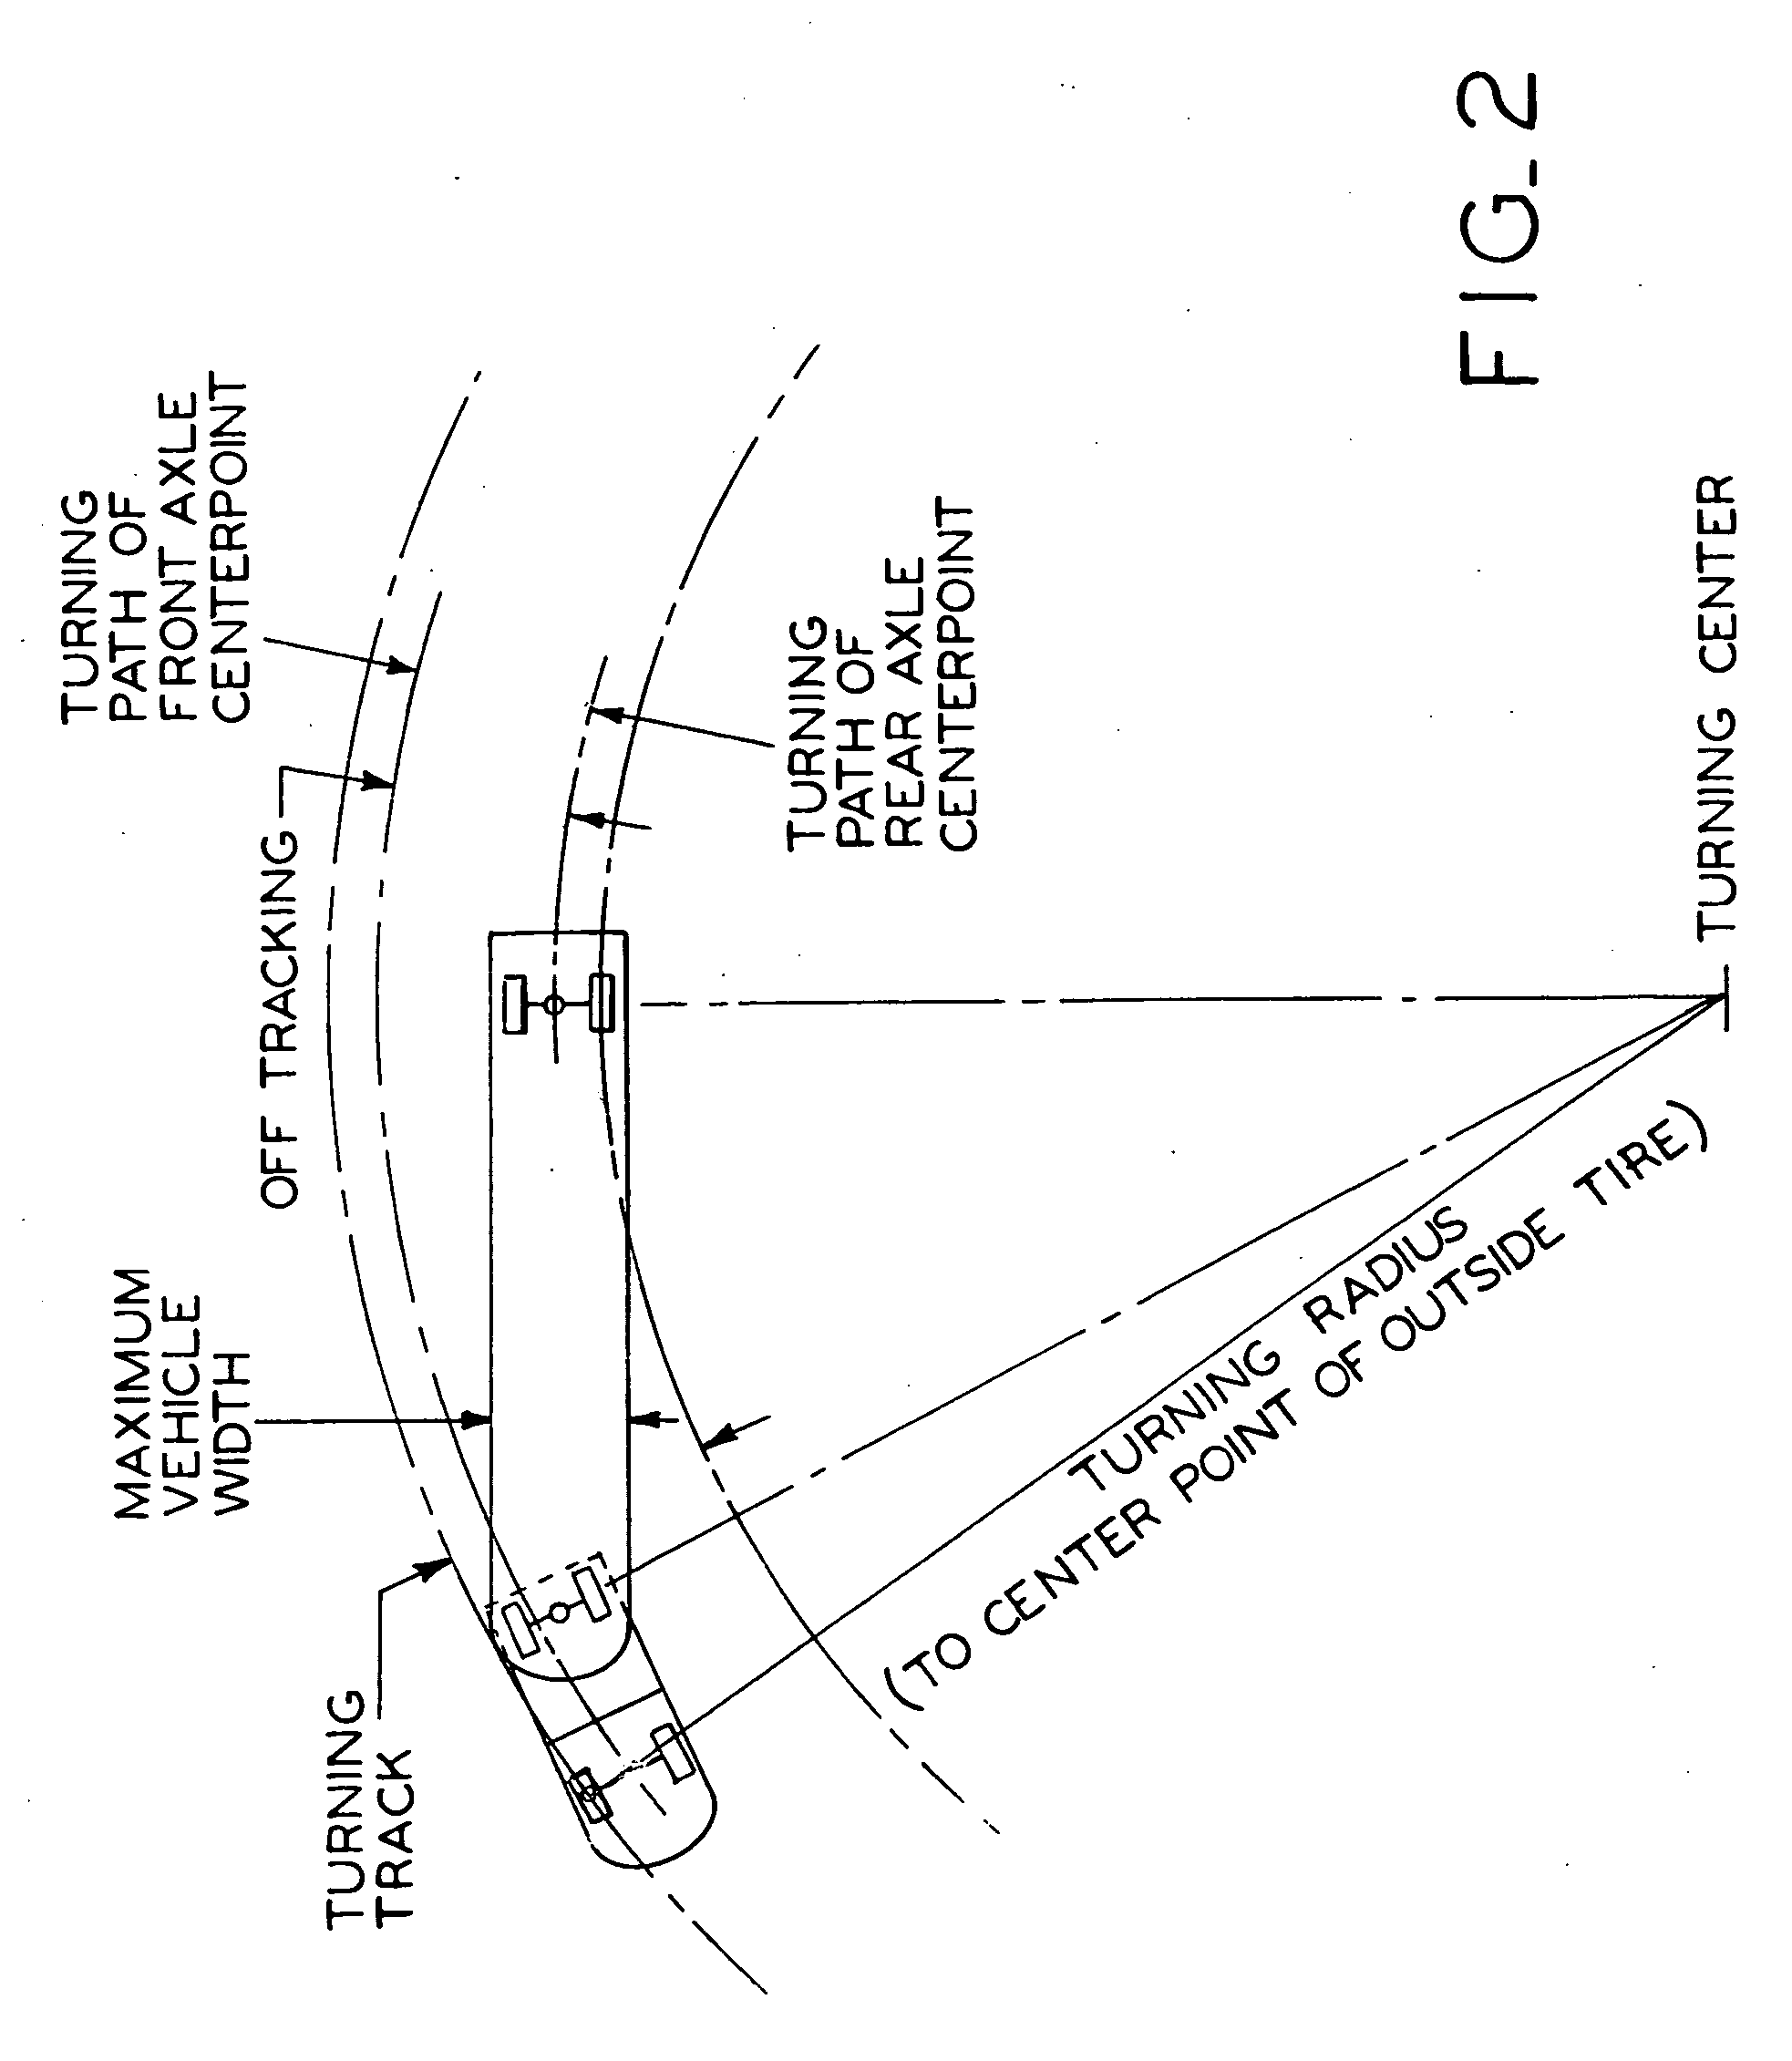 Differential steering application for trailer spotter vehicles